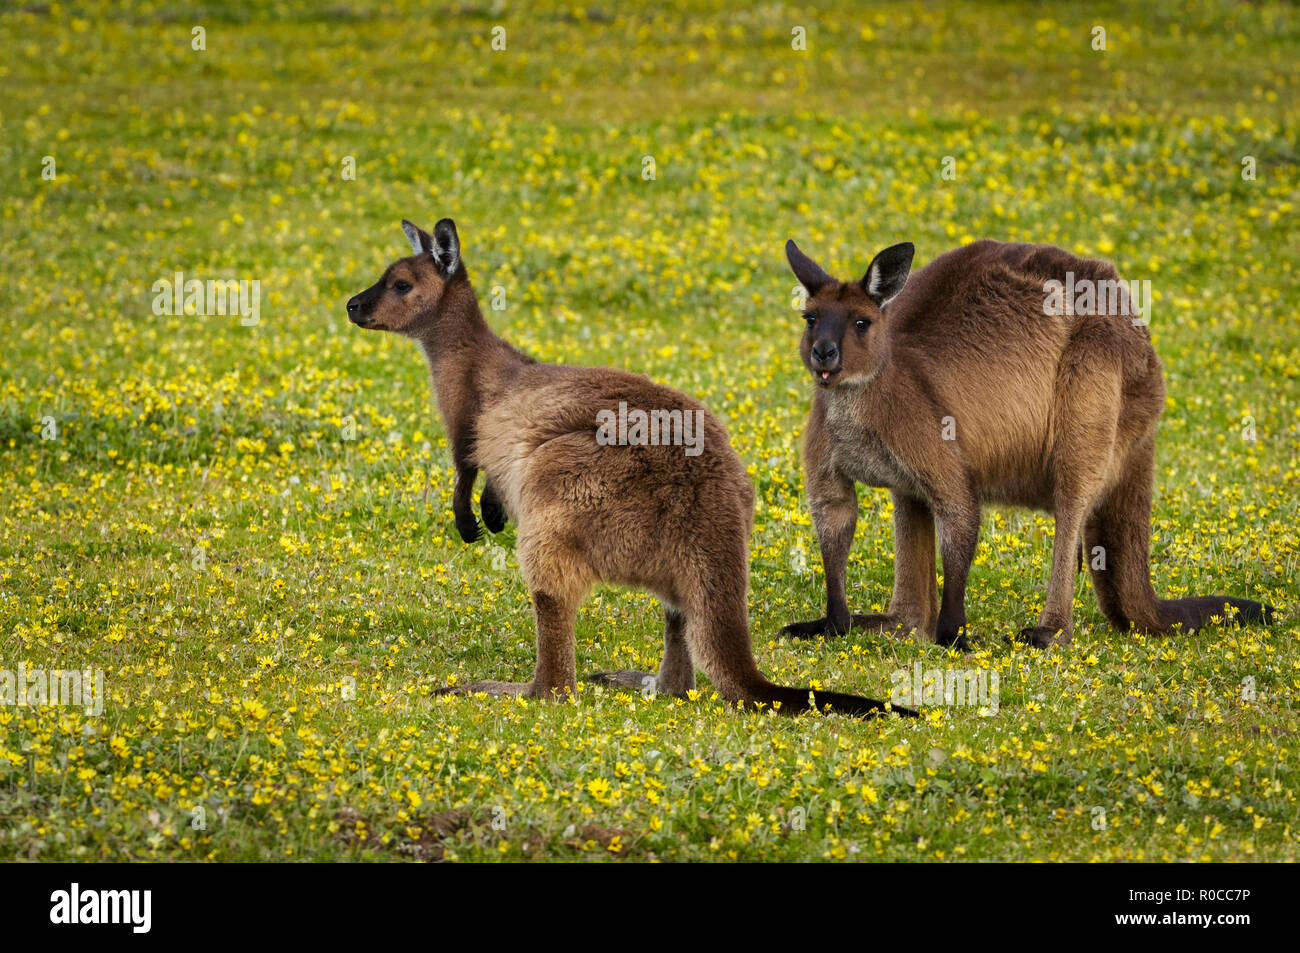 The Western Grey Kangaroo is large species, living mostly in the southern parts of Australia. Stock Photo